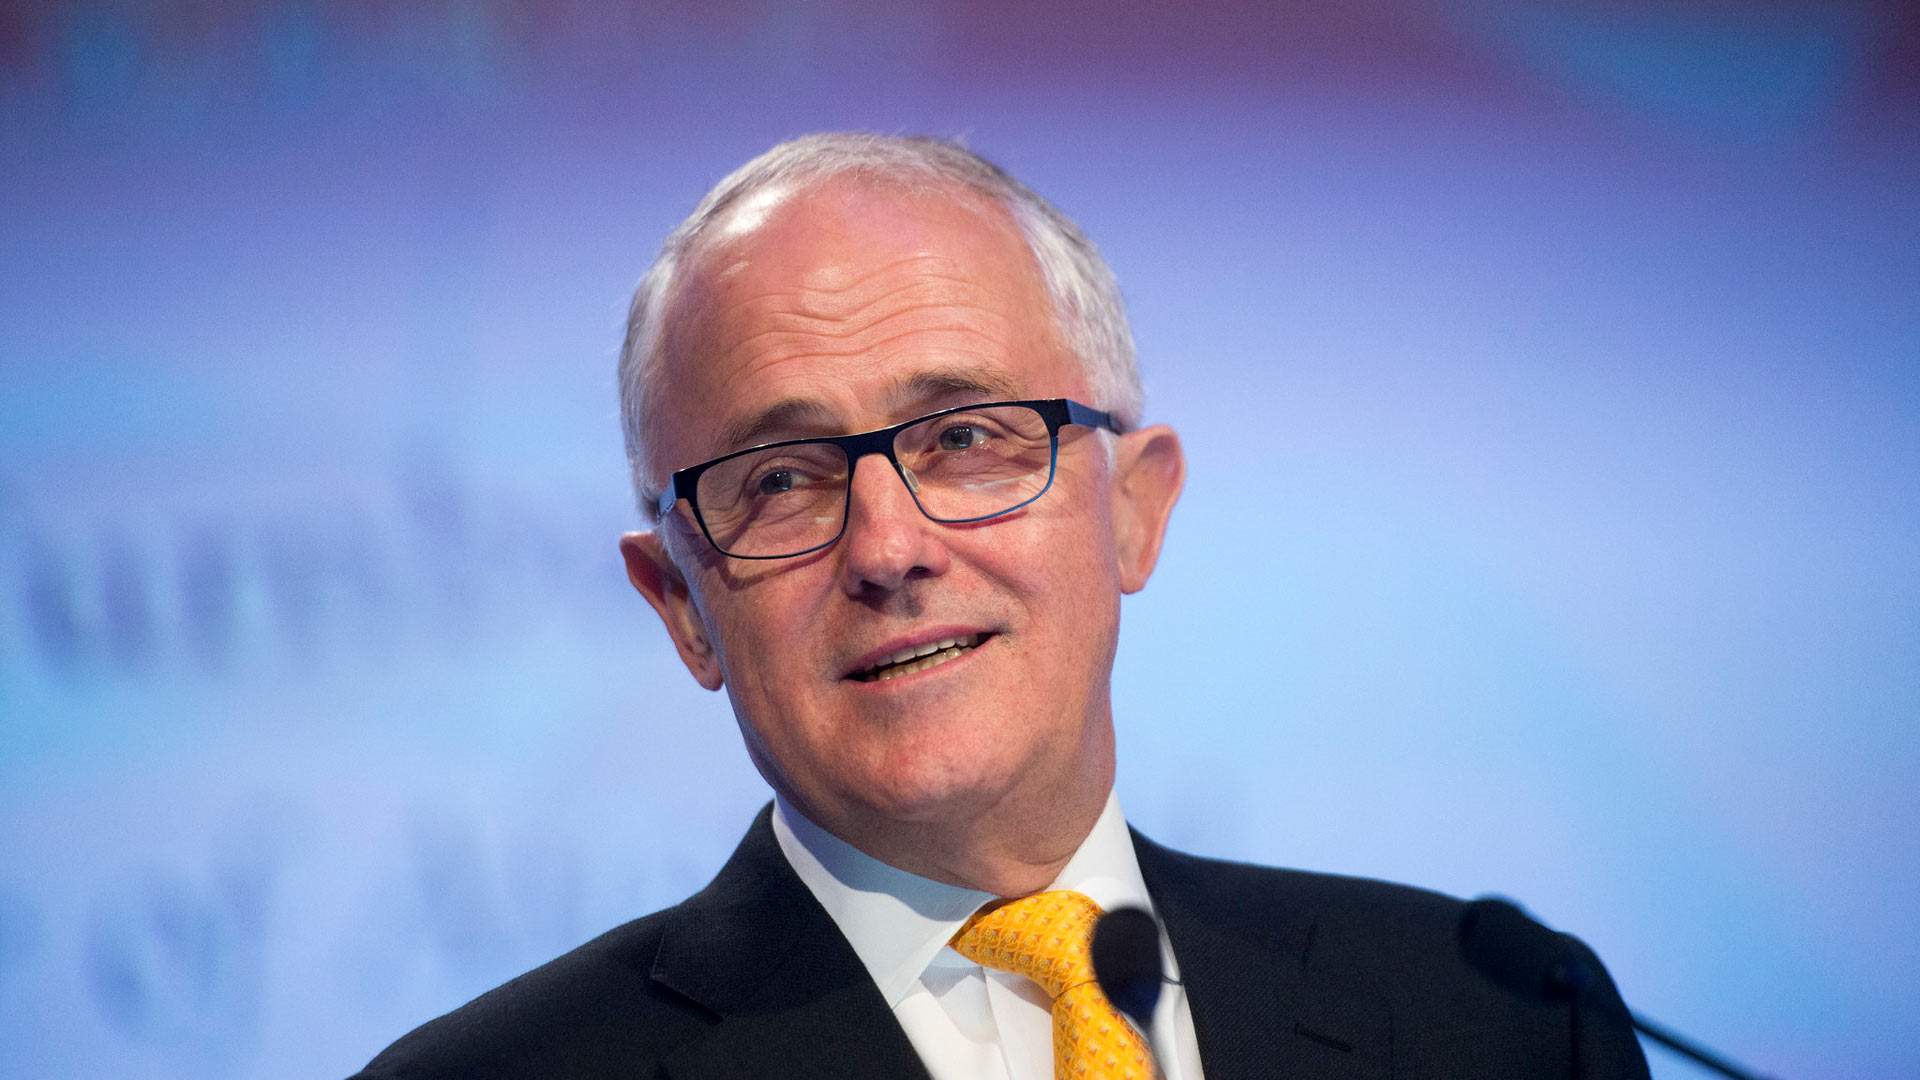 Malcolm Turnbull in Conversation with Annabel Crabb